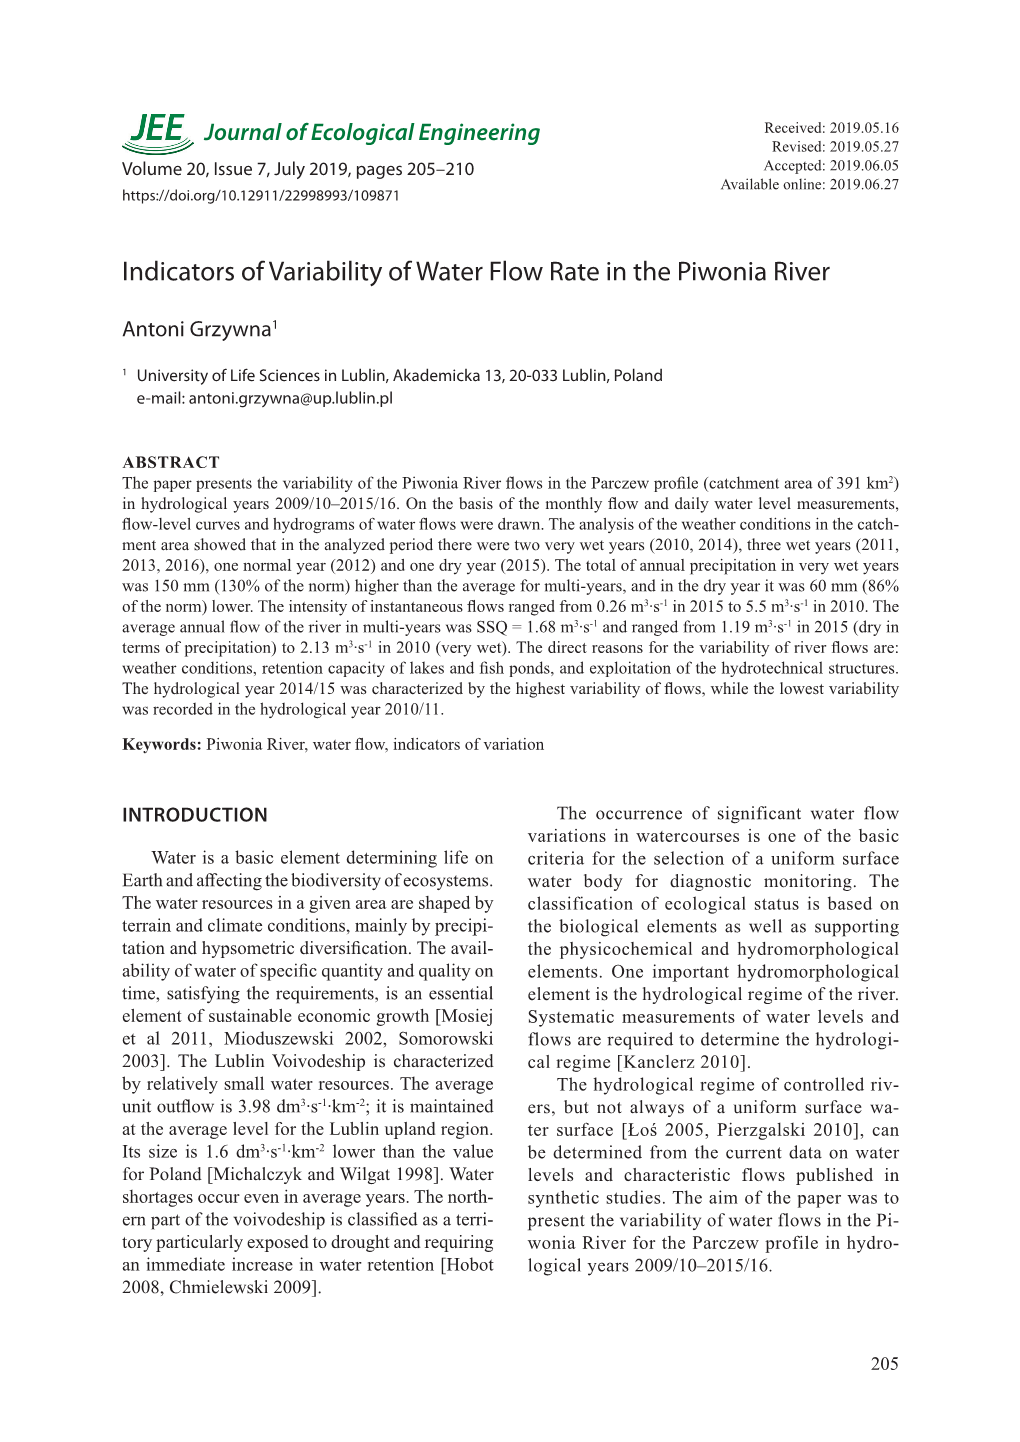 Indicators of Variability of Water Flow Rate in the Piwonia River